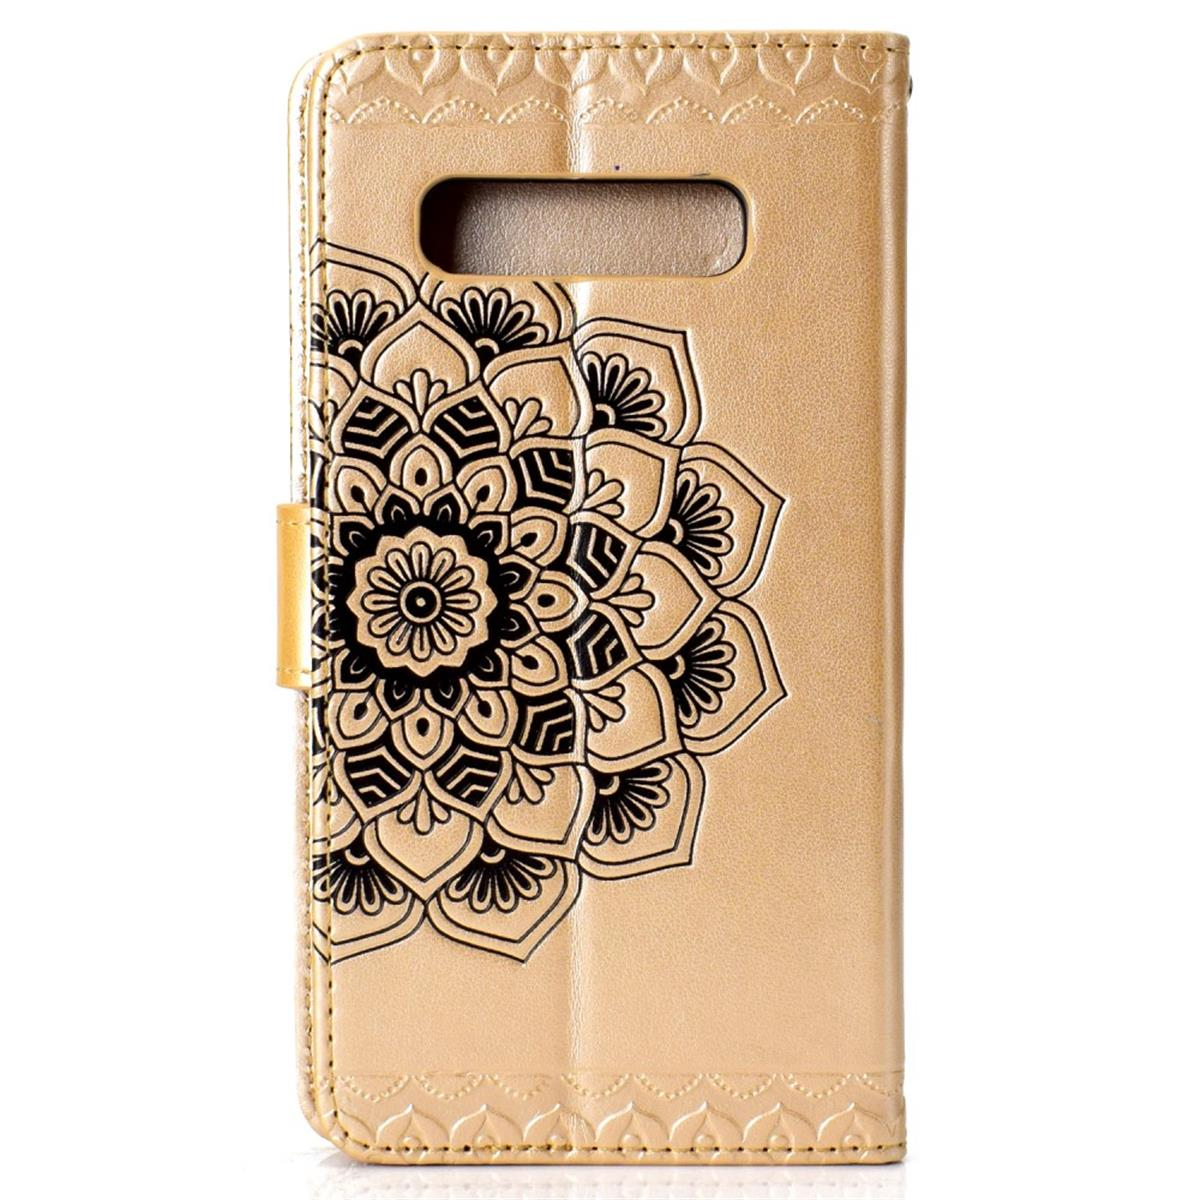 Gold Mandala COVERKINGZ Galaxy Samsung, Klapphülle Bookcover, S10, mit Muster,